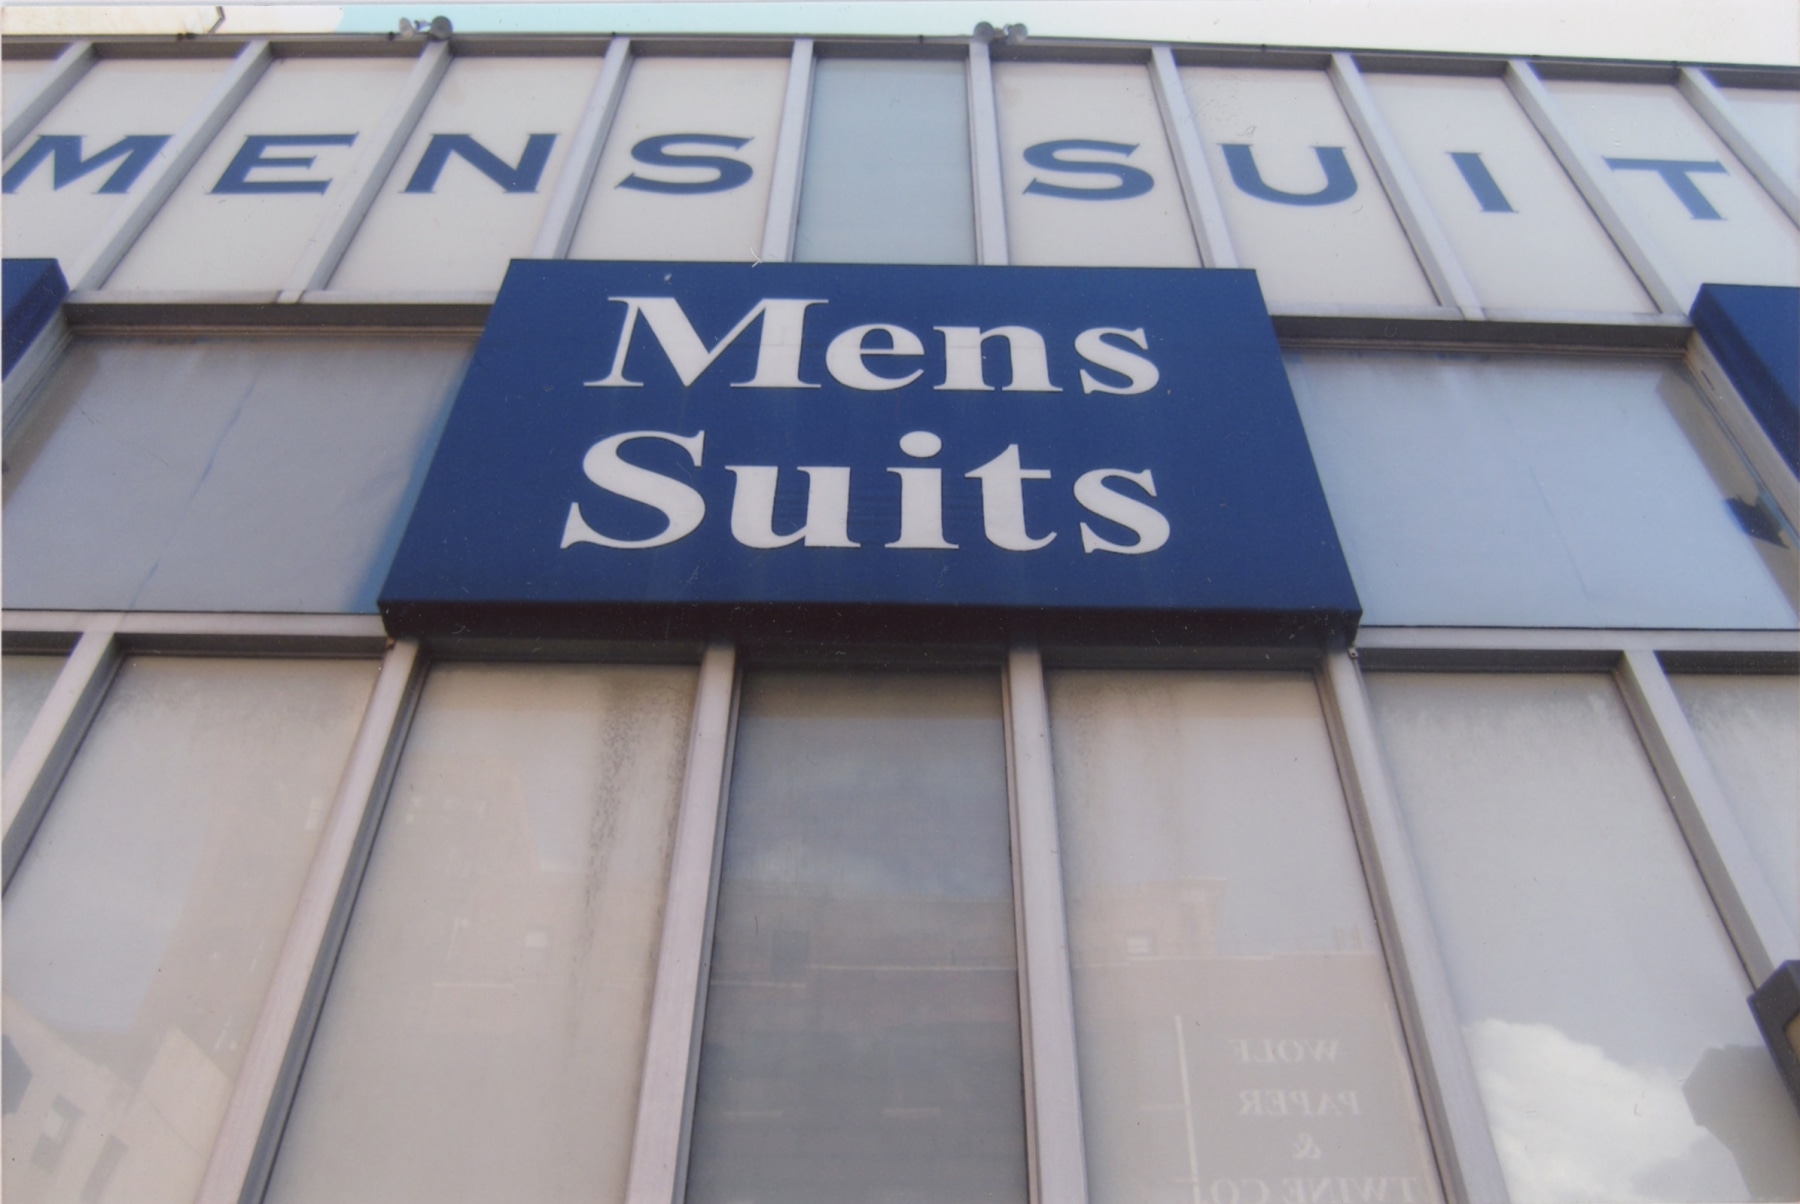 CHARLES LEDRAY: MENS SUITS - FROM THE RESEARCH DEPARTMENT - Viewing Room - Peter Freeman, Inc. Viewing Room